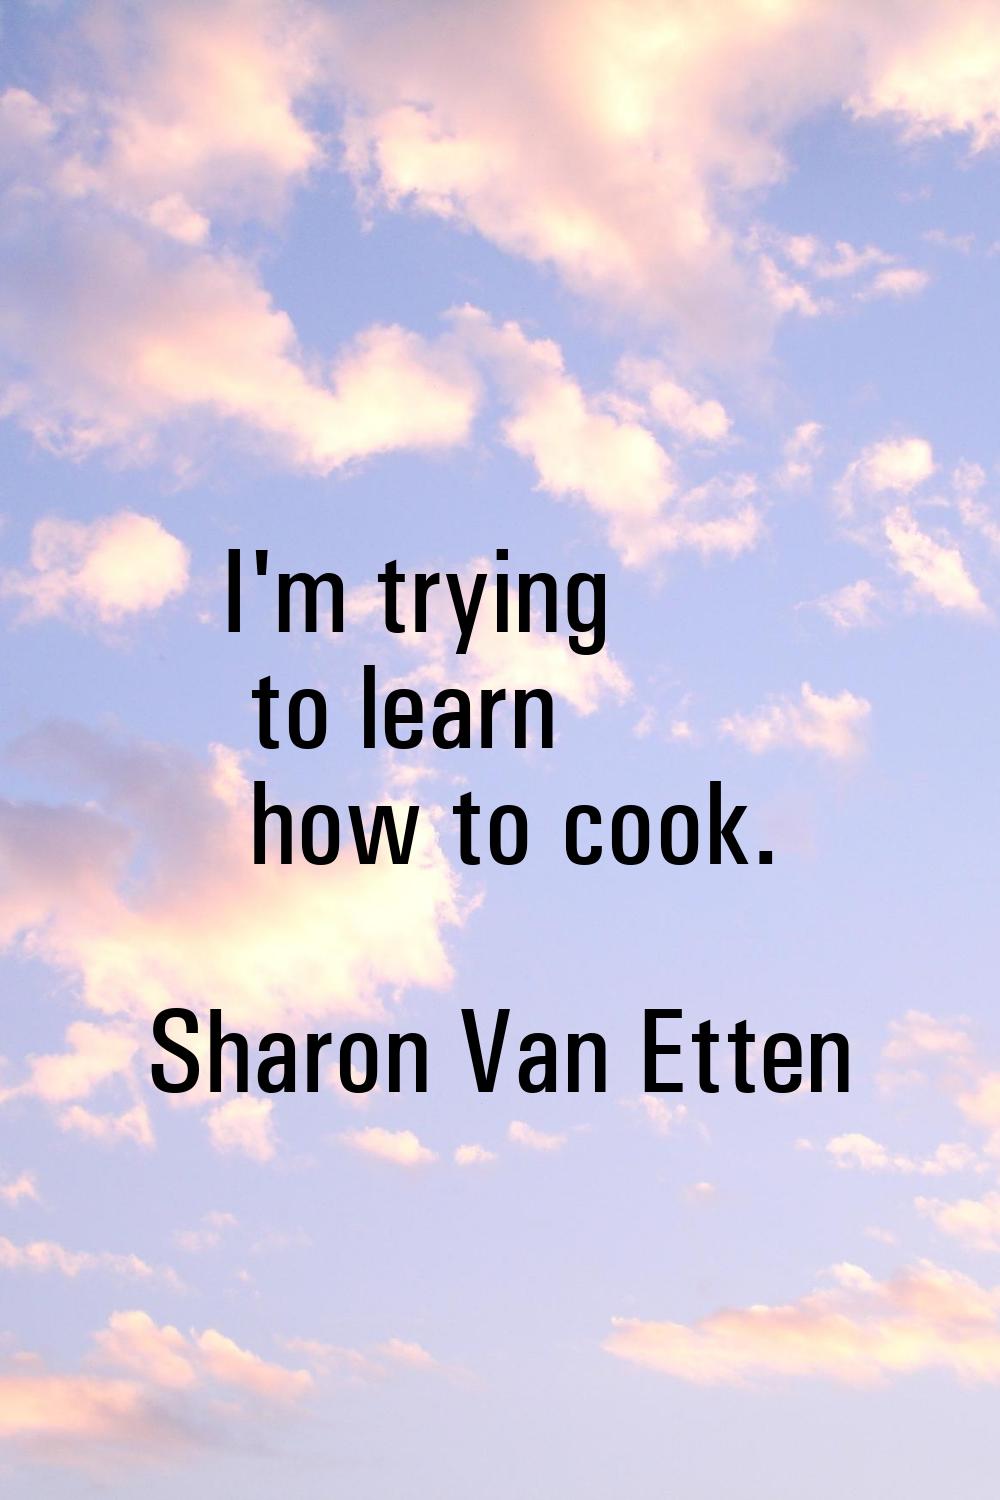 I'm trying to learn how to cook.